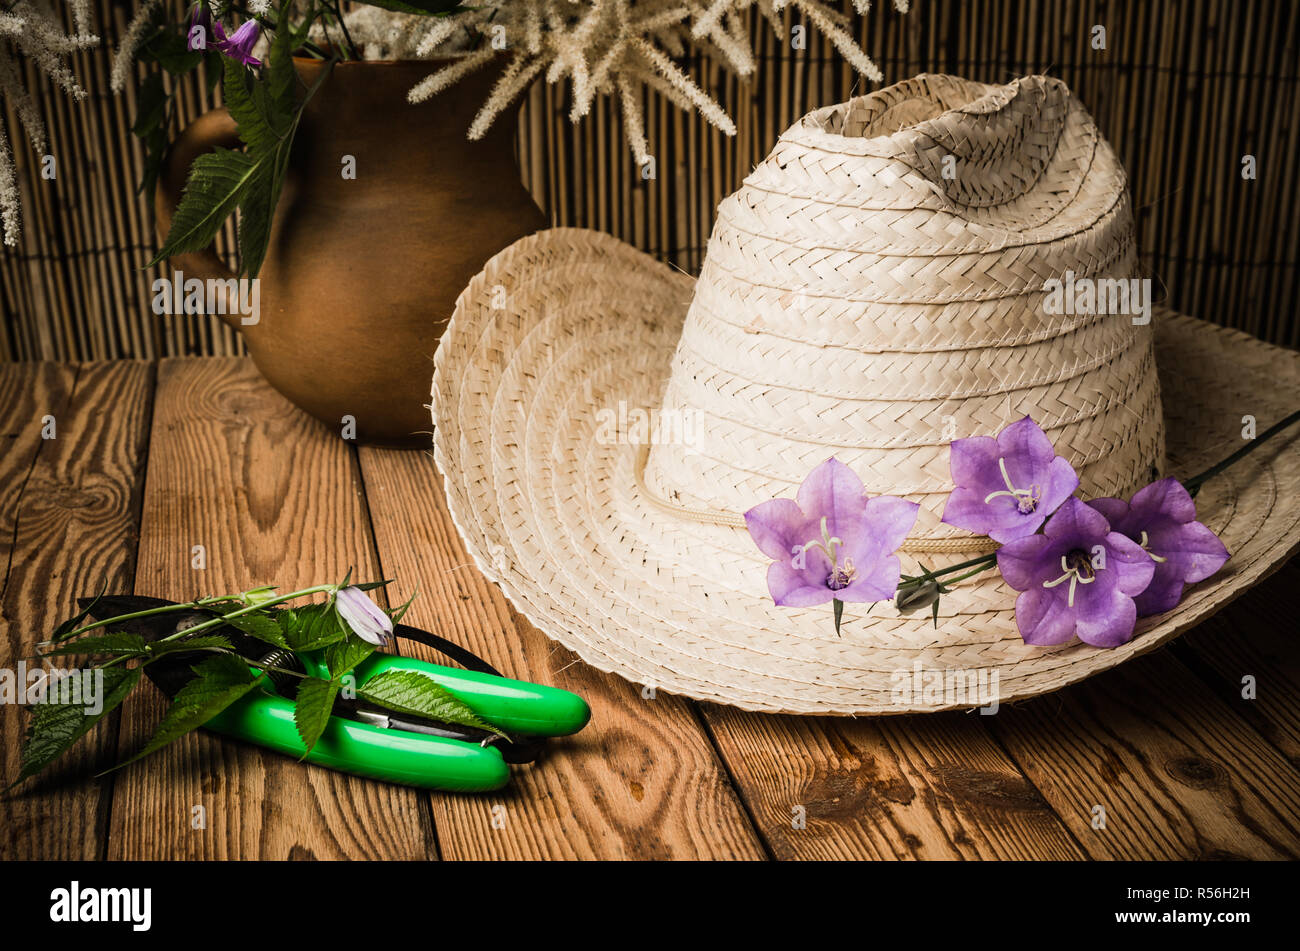 Straw hat and flowering campanula, close-up Stock Photo